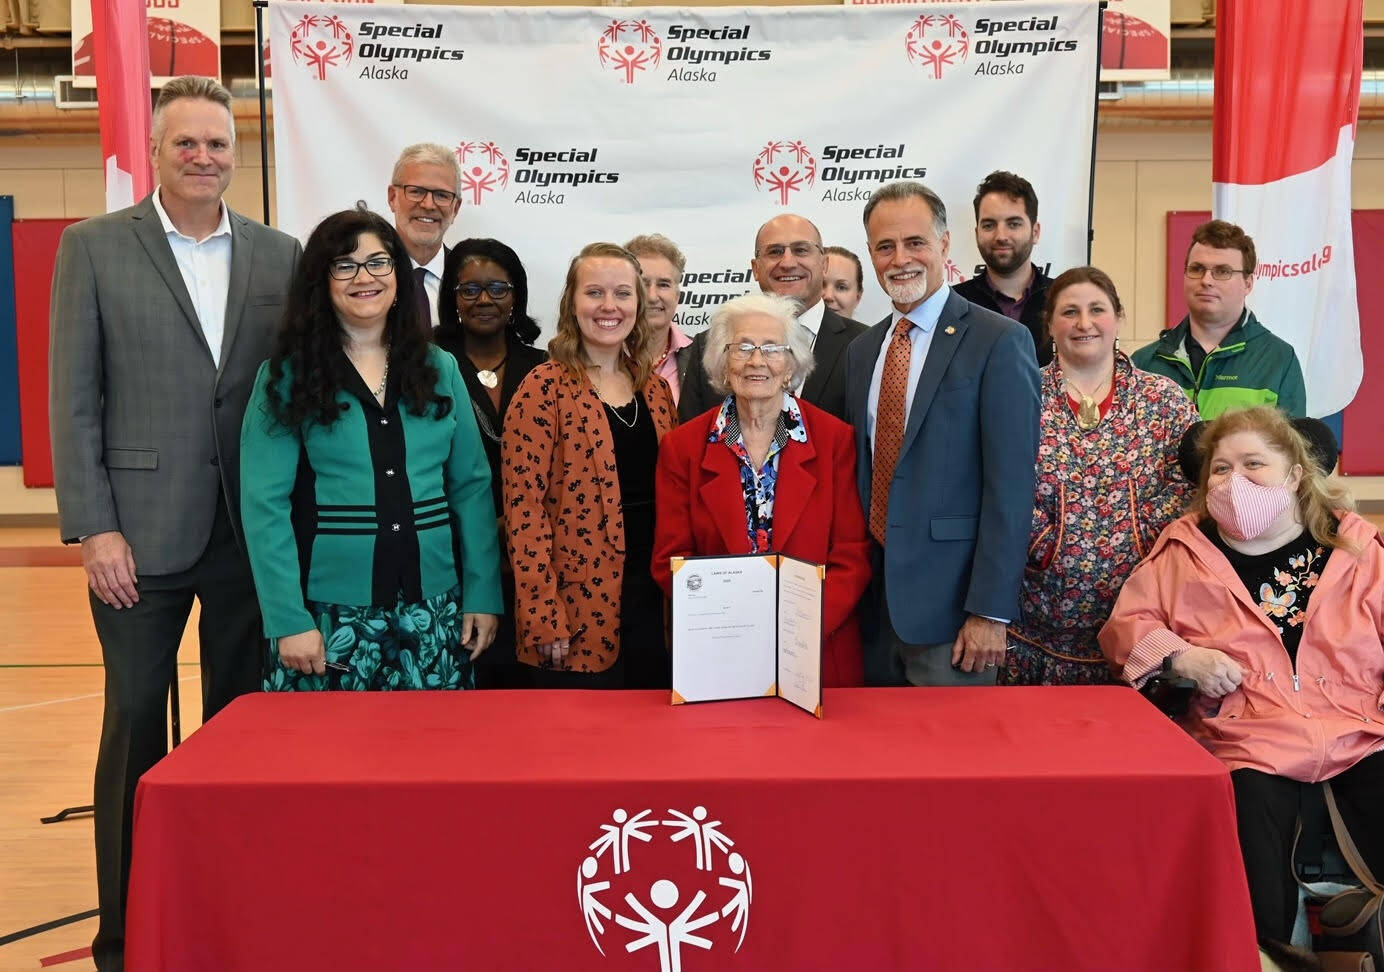 Gov. Mike Dunleavy, Heidi Lieb-Williams, Madison Govin, Madeline Micciche, Peter Micciche and others celebrate the signing of Senate Bill 185 into law at Special Olympics Alaska in Anchorage, Alaska, on Tuesday, Sept. 13, 2022. (Photo courtesy Alaska Office of the Governor)